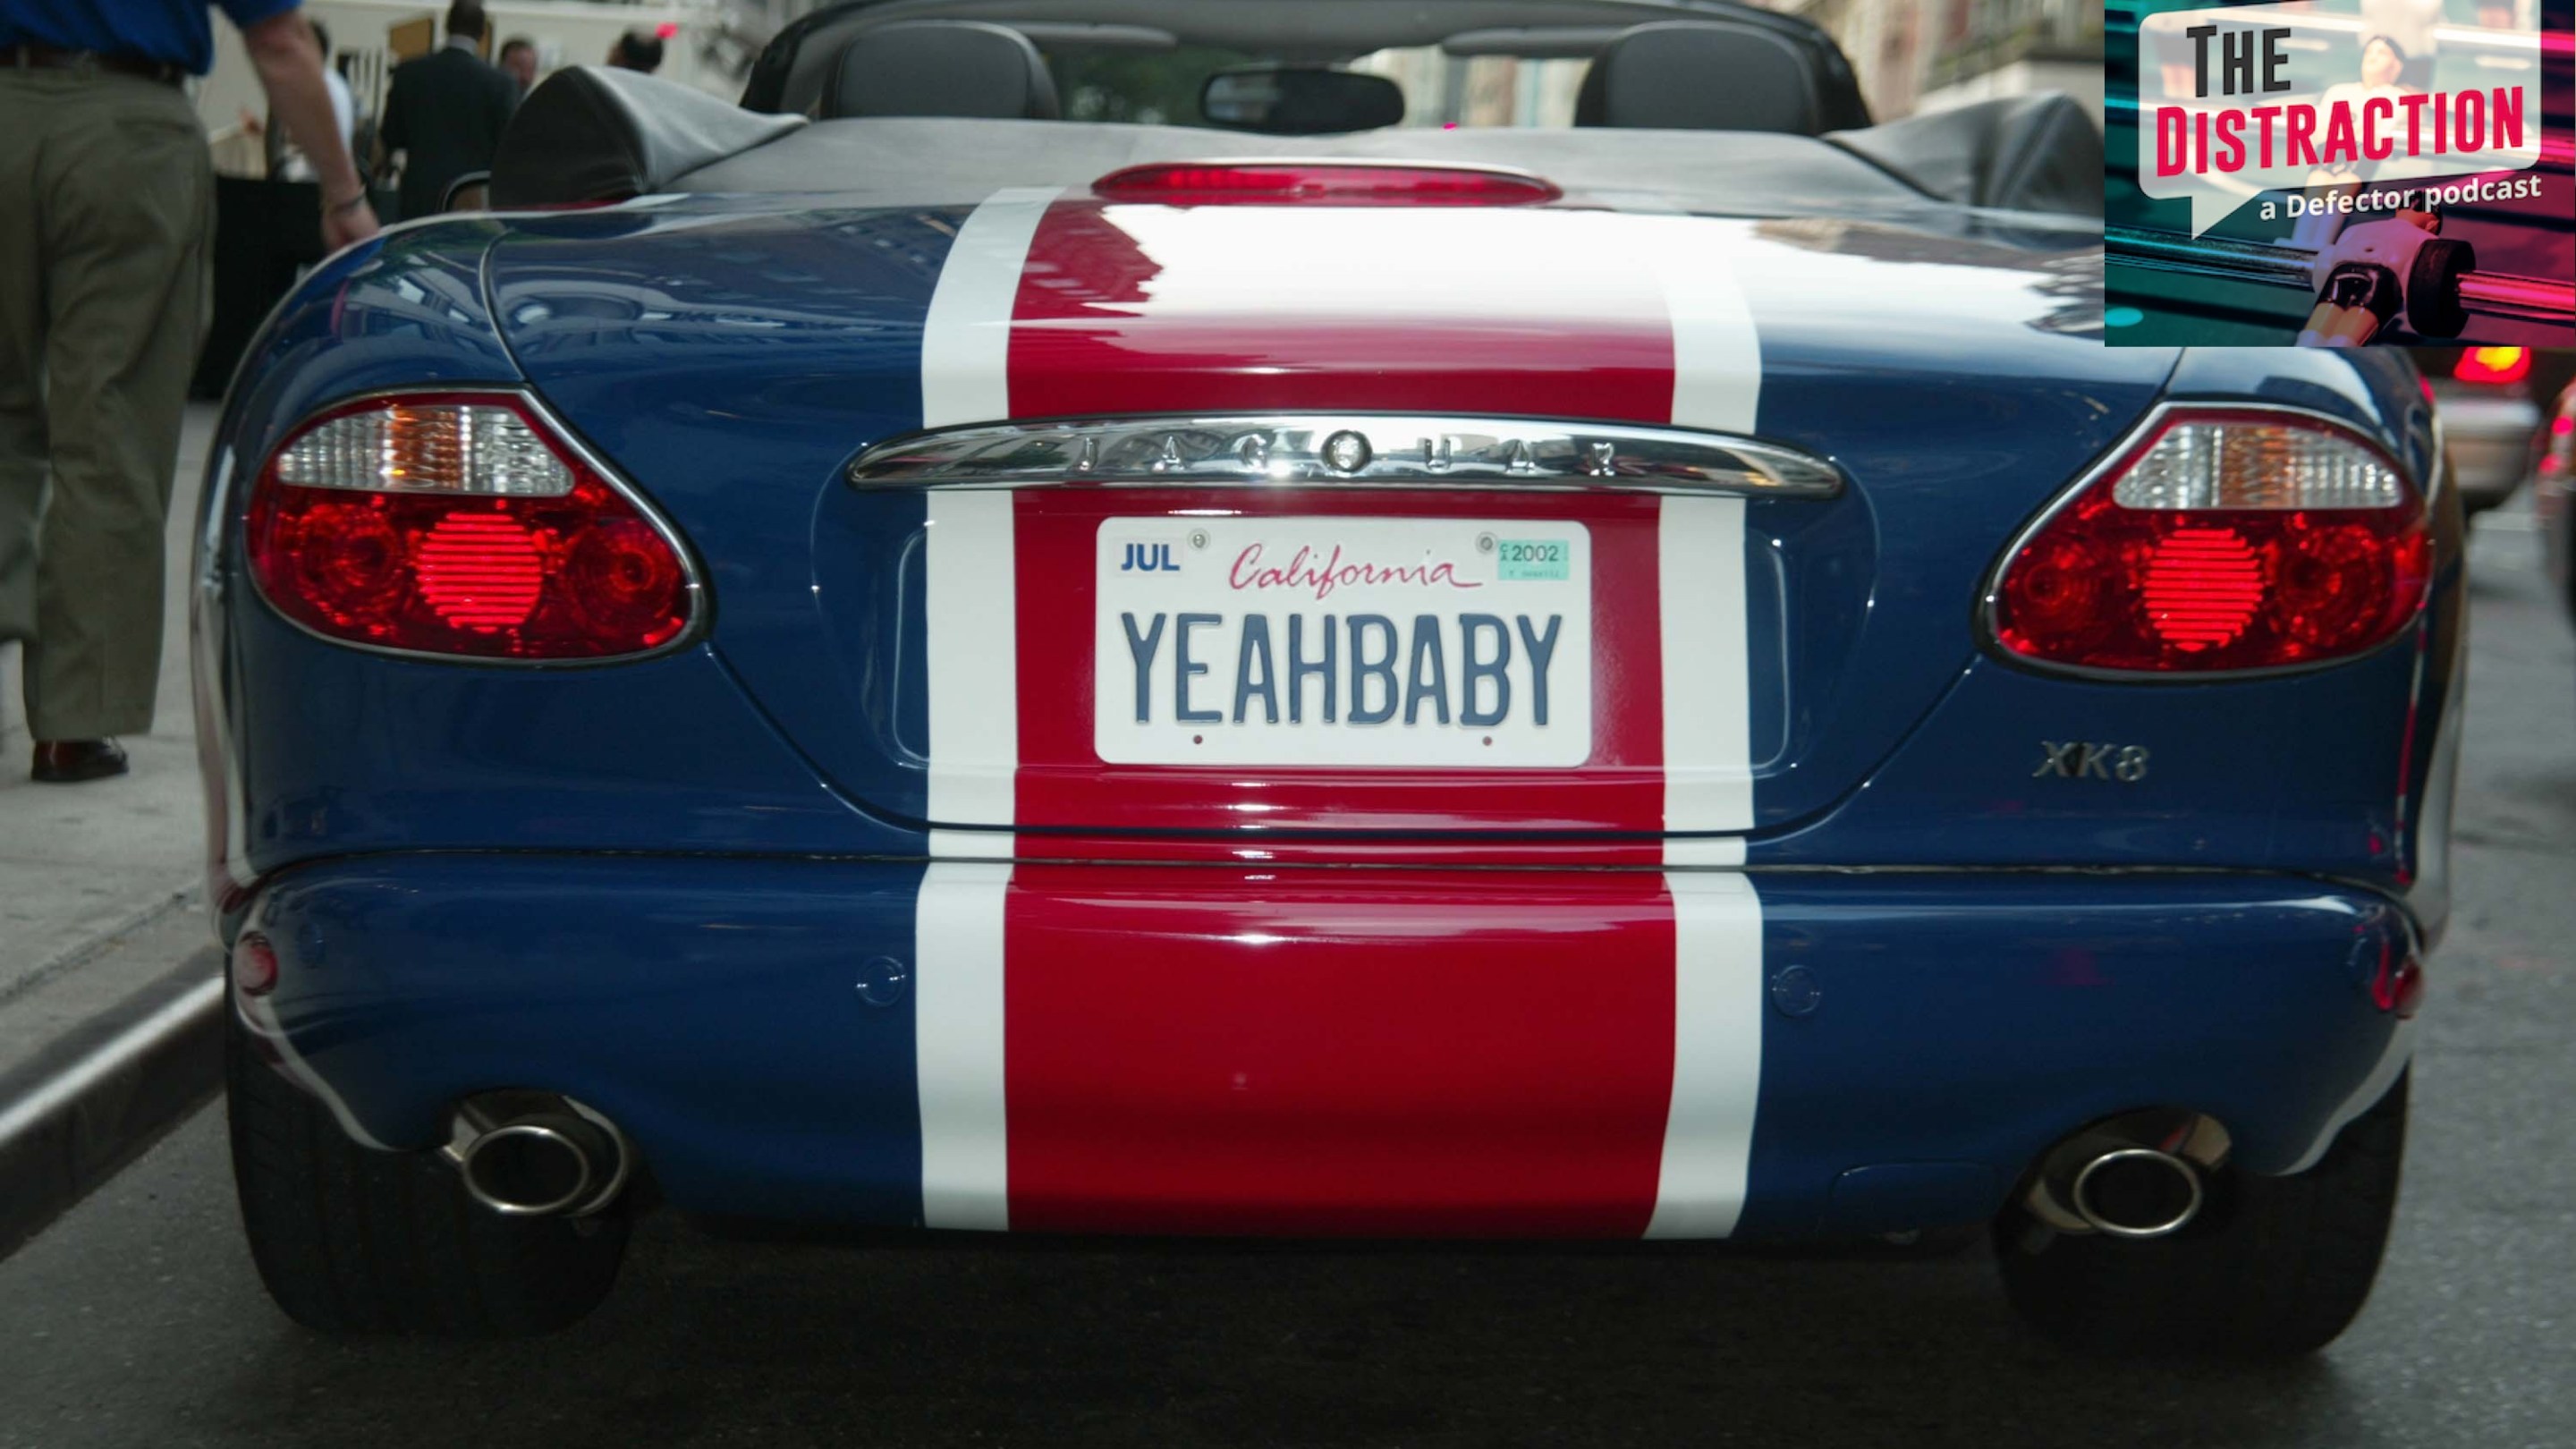 Austin Powers's XK8 Union Jack Jaguar convertible at the New York premiere of "Austin Powers in Goldmember" with The Distraction logo at upper right.